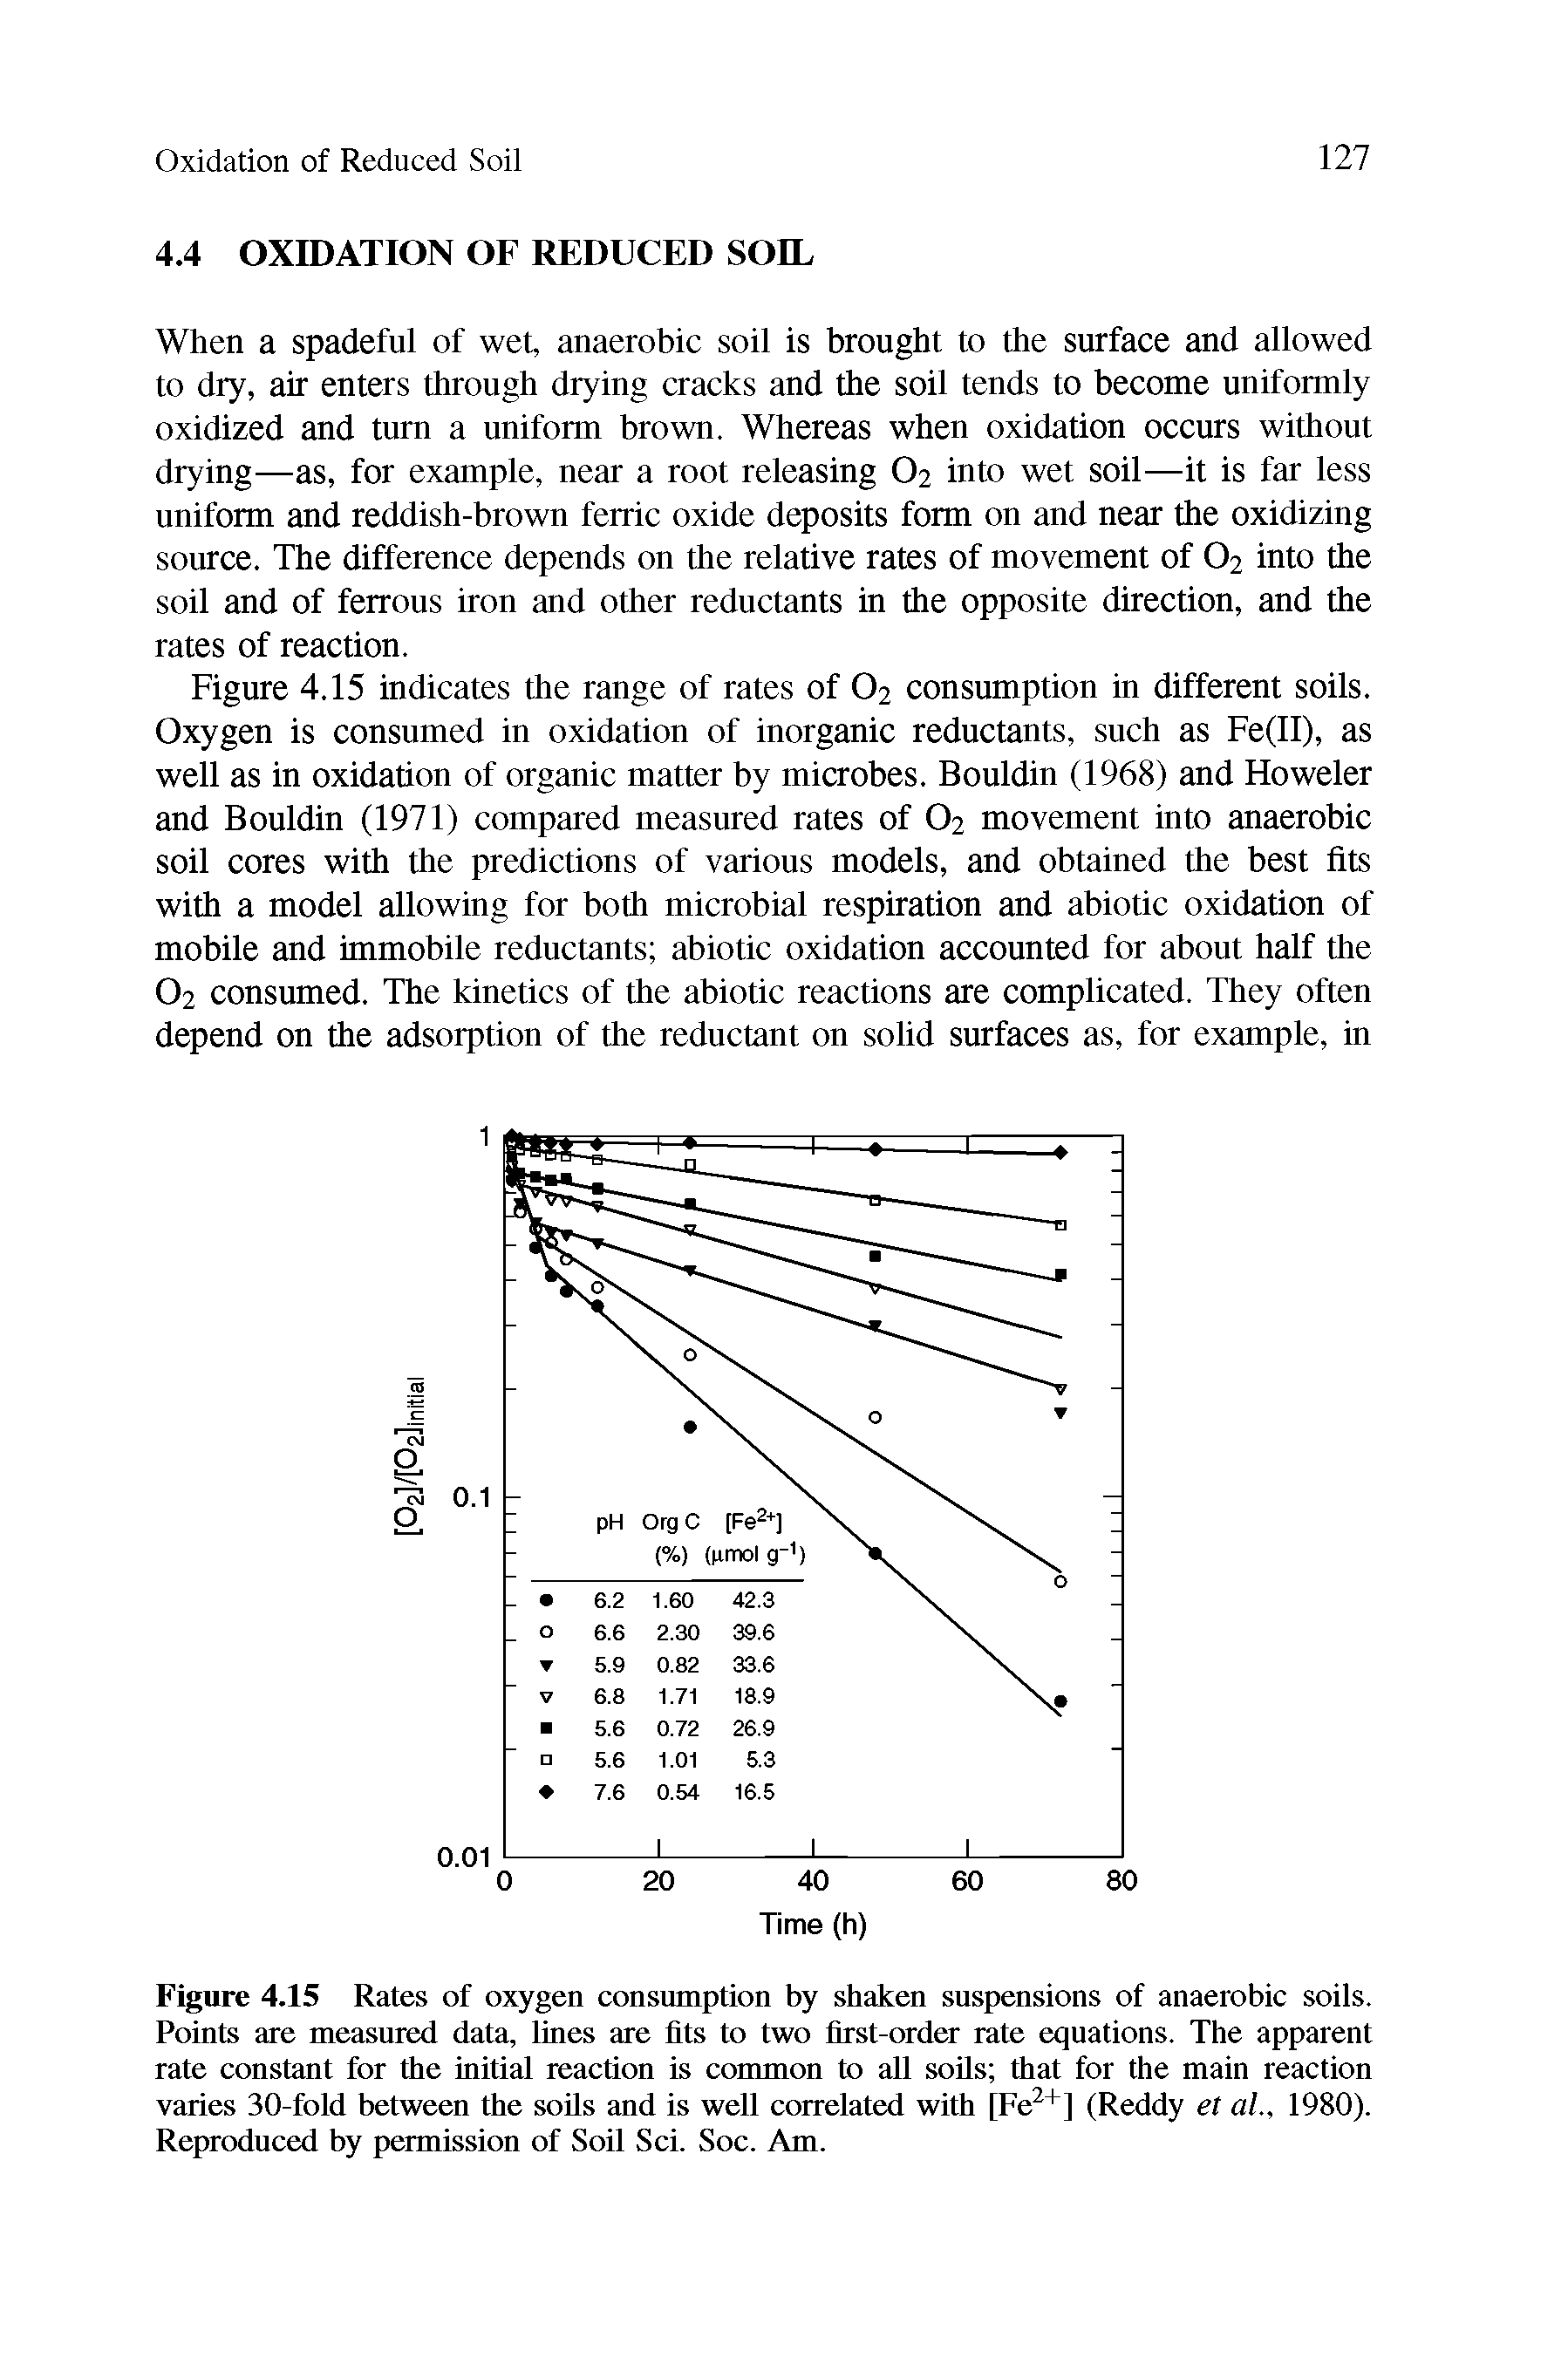 Figure 4.15 Rates of oxygen consumption by shaken suspensions of anaerobic soils. Points are measured data, lines are fits to two first-order rate equations. The apparent rate constant for the initial reaction is common to all sods that for the main reaction varies 30-fold between the soils and is well correlated with [Fe +] (Reddy et al., 1980). Reproduced by permission of Soil Sci. Soc. Am.